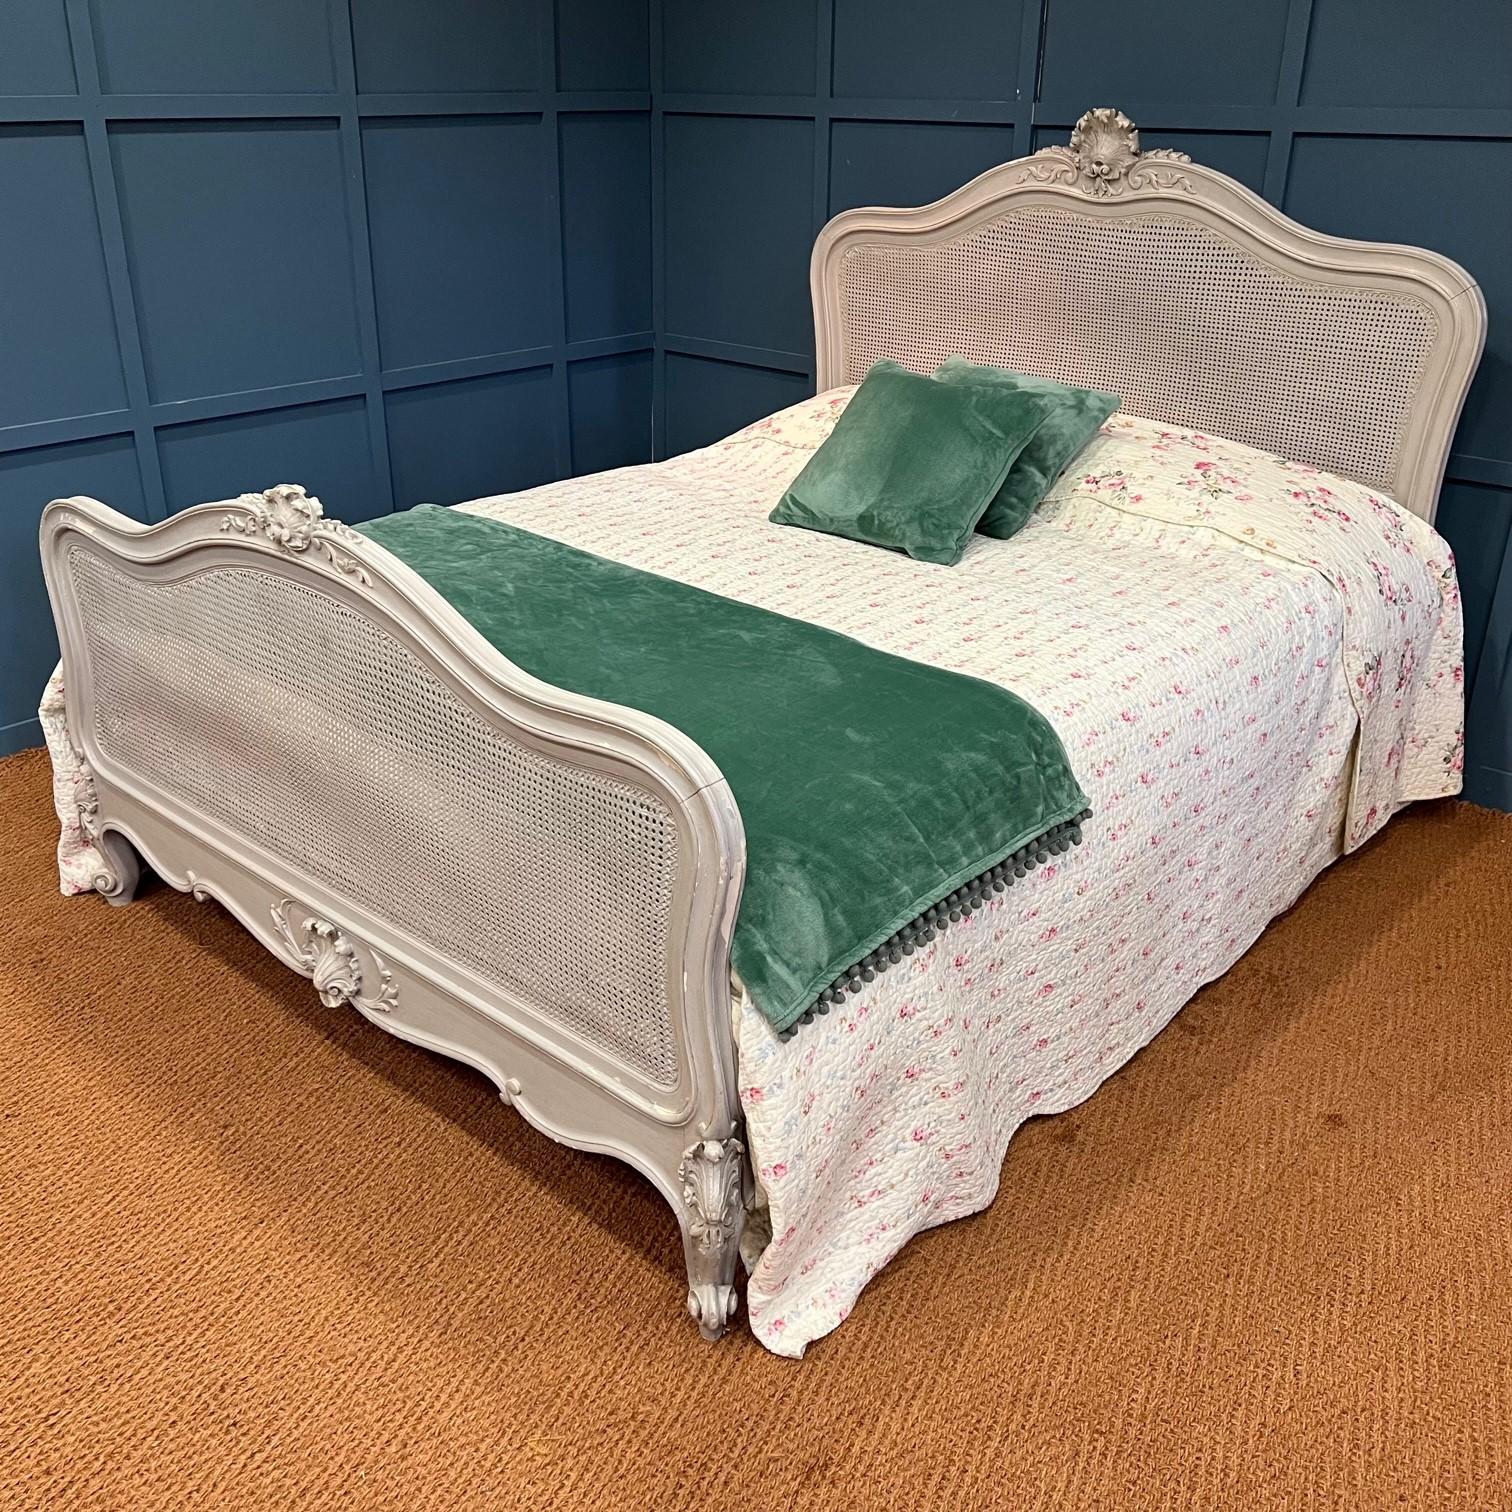 An antique French king size (5’ wide) painted caned bed – circa 1900. This is such a lovely bed – in the style of Louis XV. The frame has a large hand carved shell at the centre of the head and foot end along with decorative carved swirls and